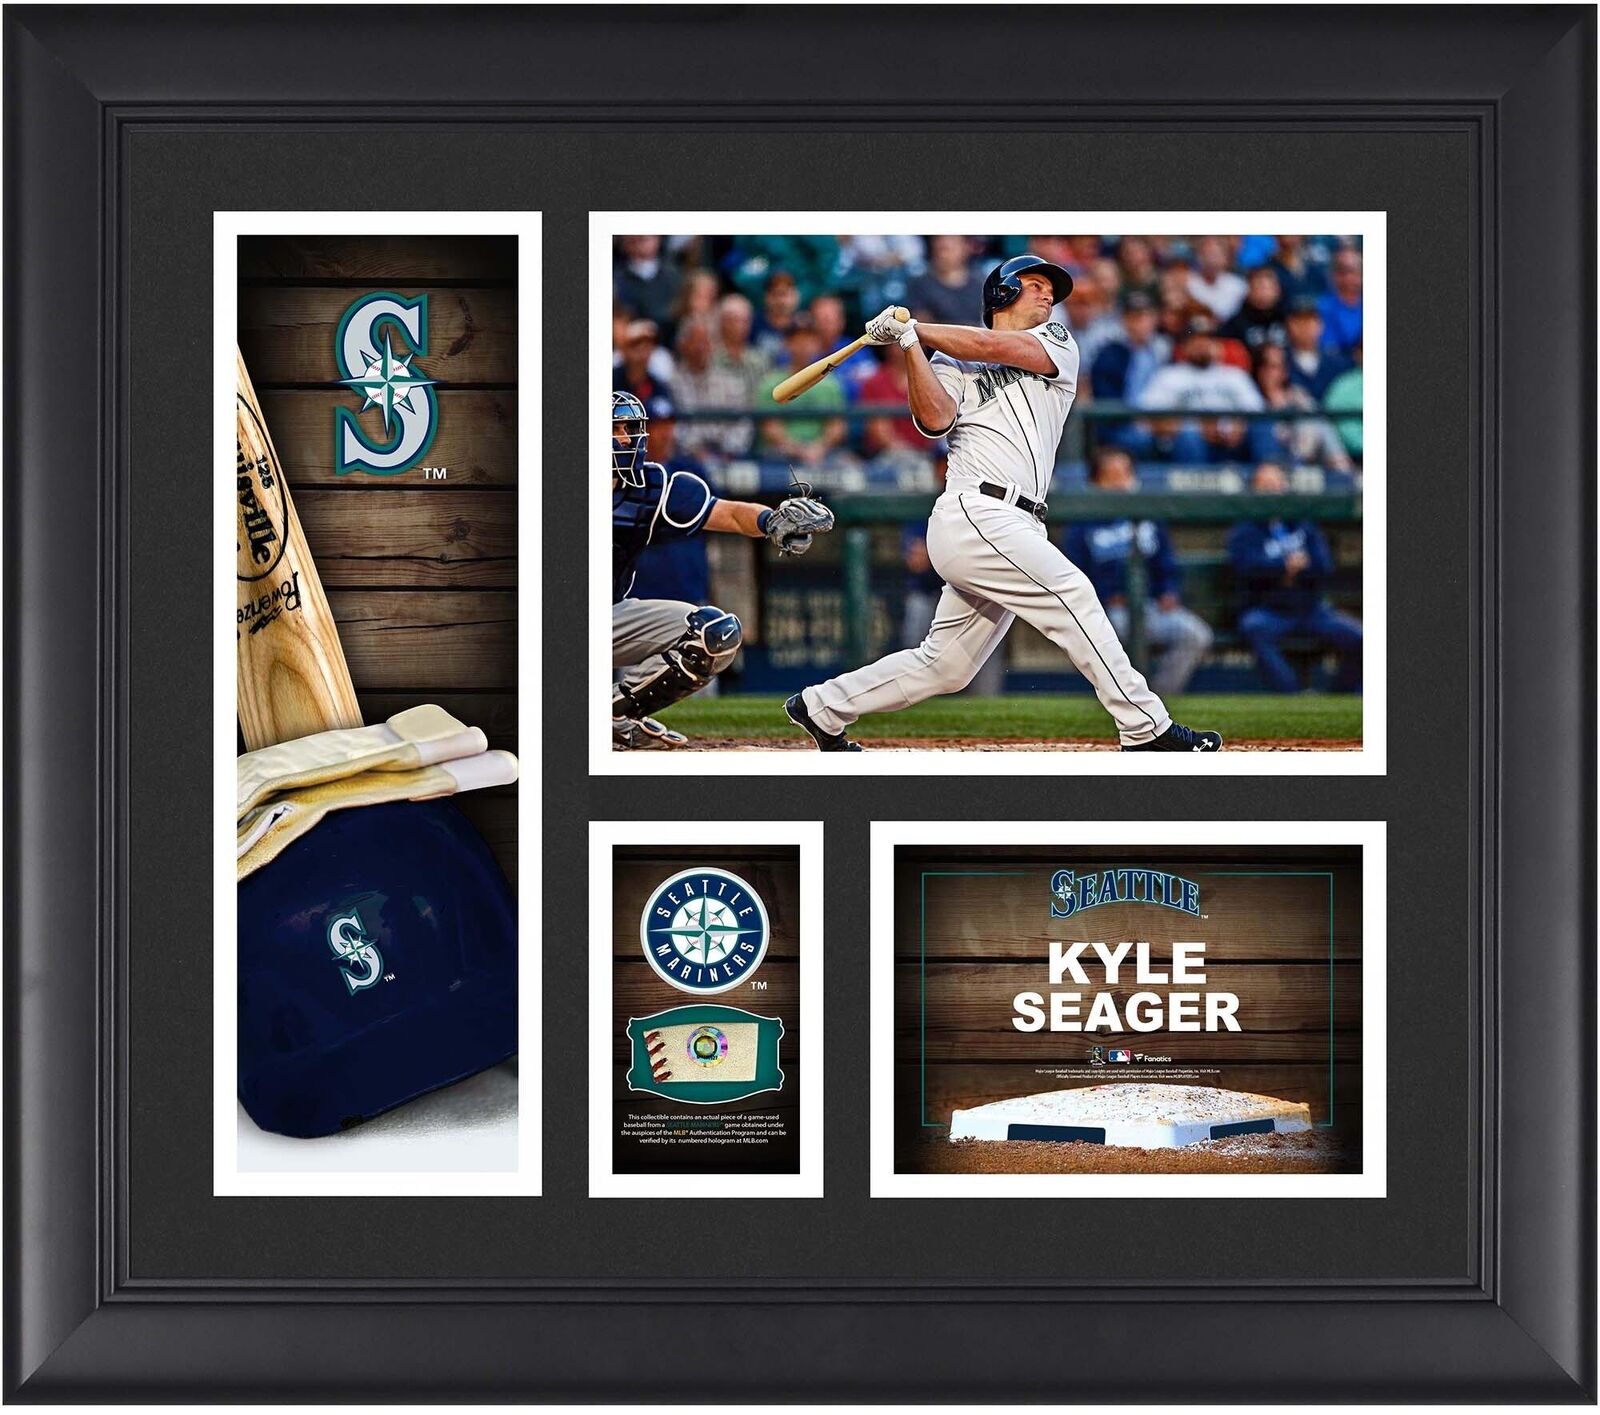 Kyle Seager Seattle Mariners Framed 15x17 Collage w/Piece of G-U Ball